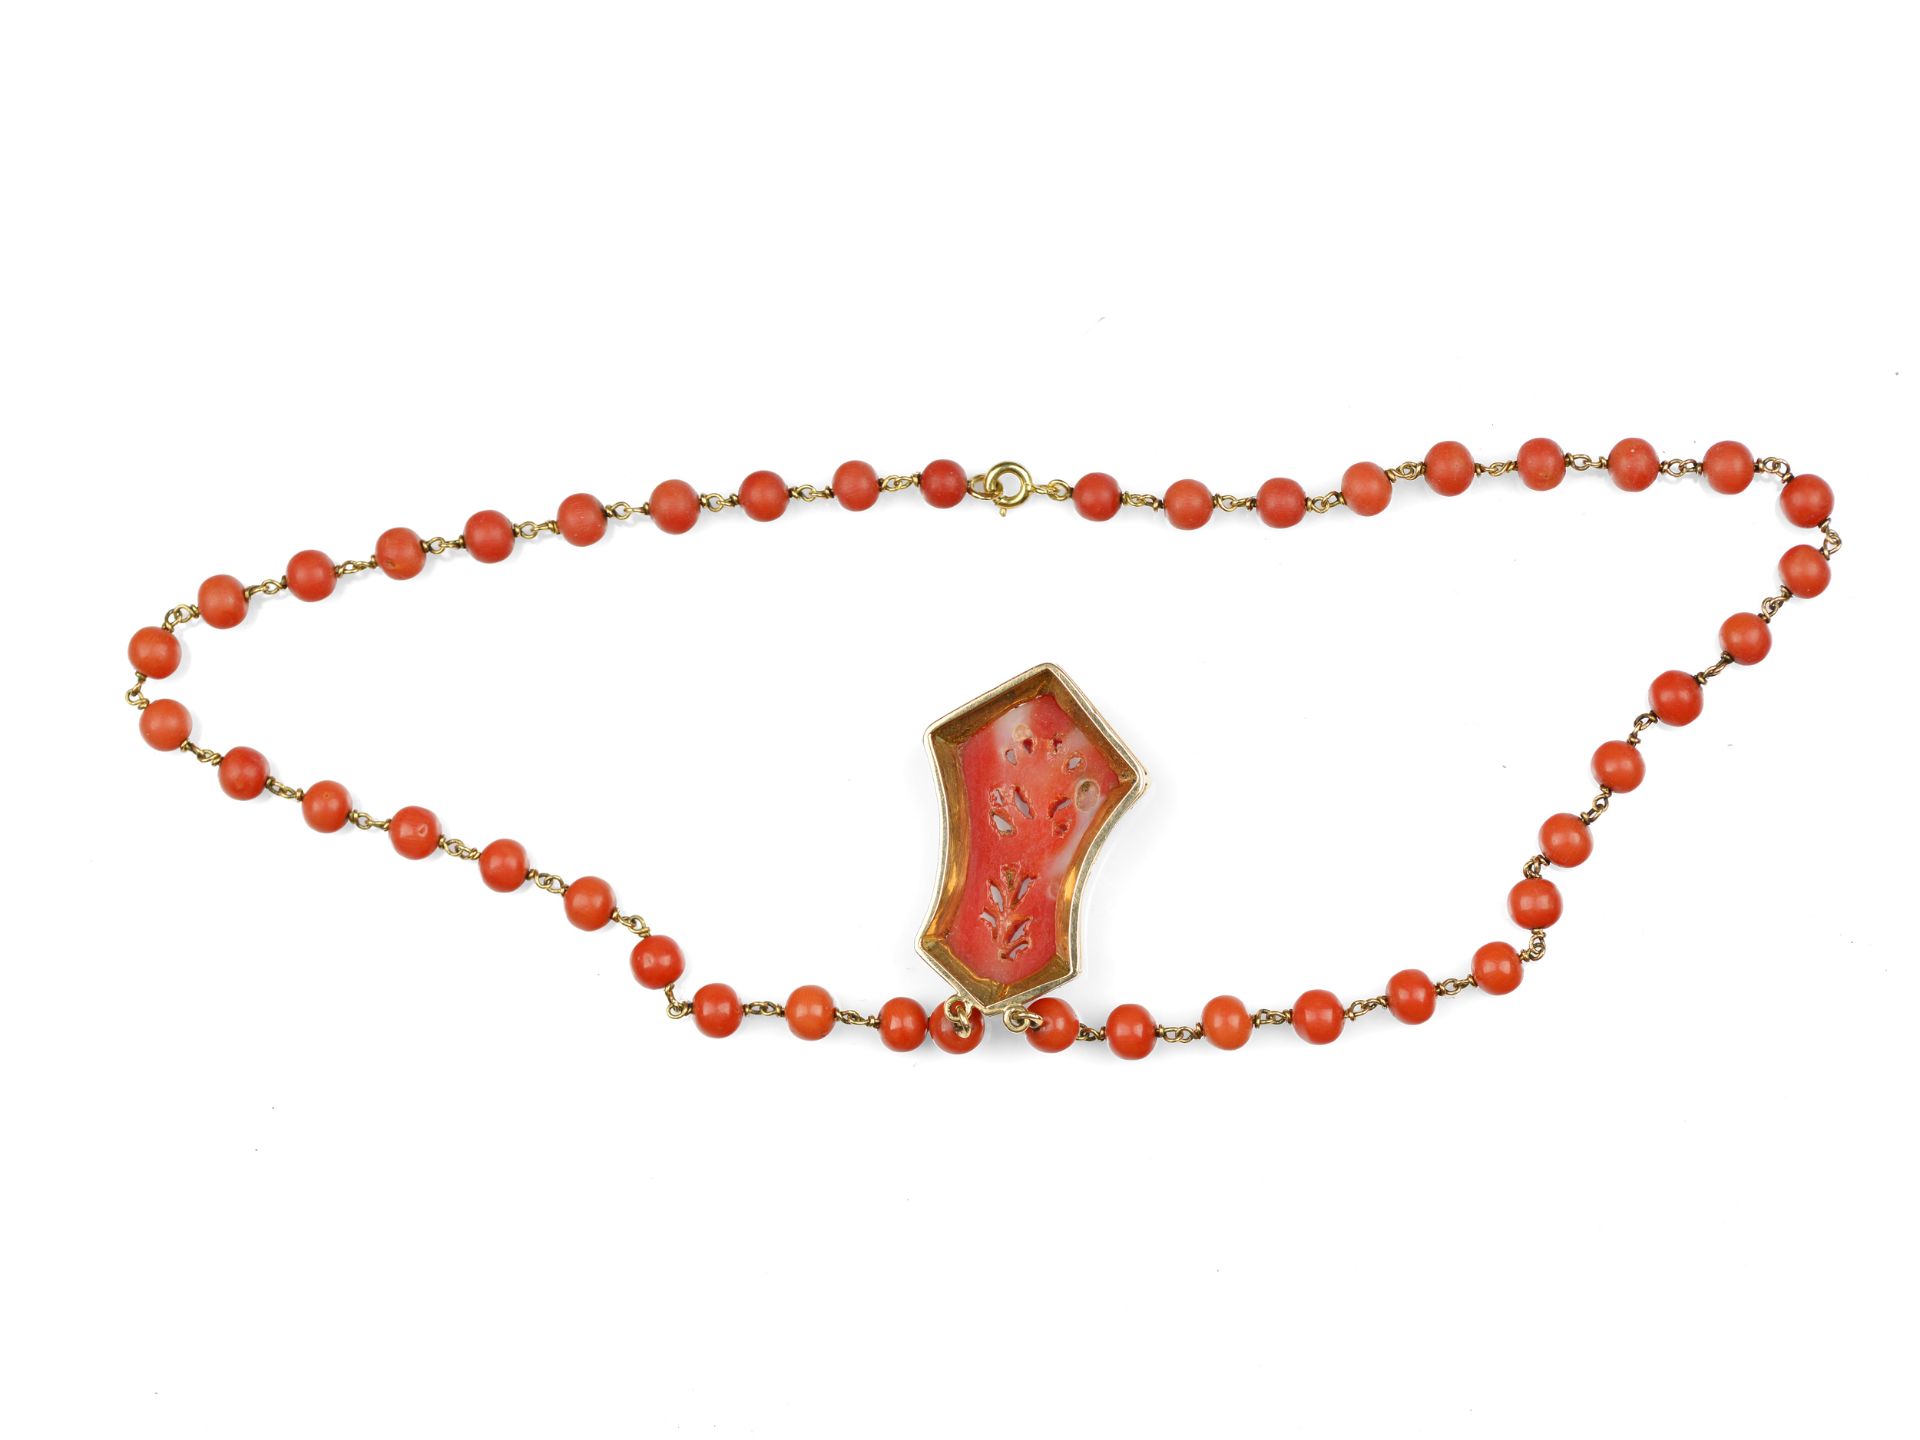 Coral necklace with a pendant - Image 2 of 2